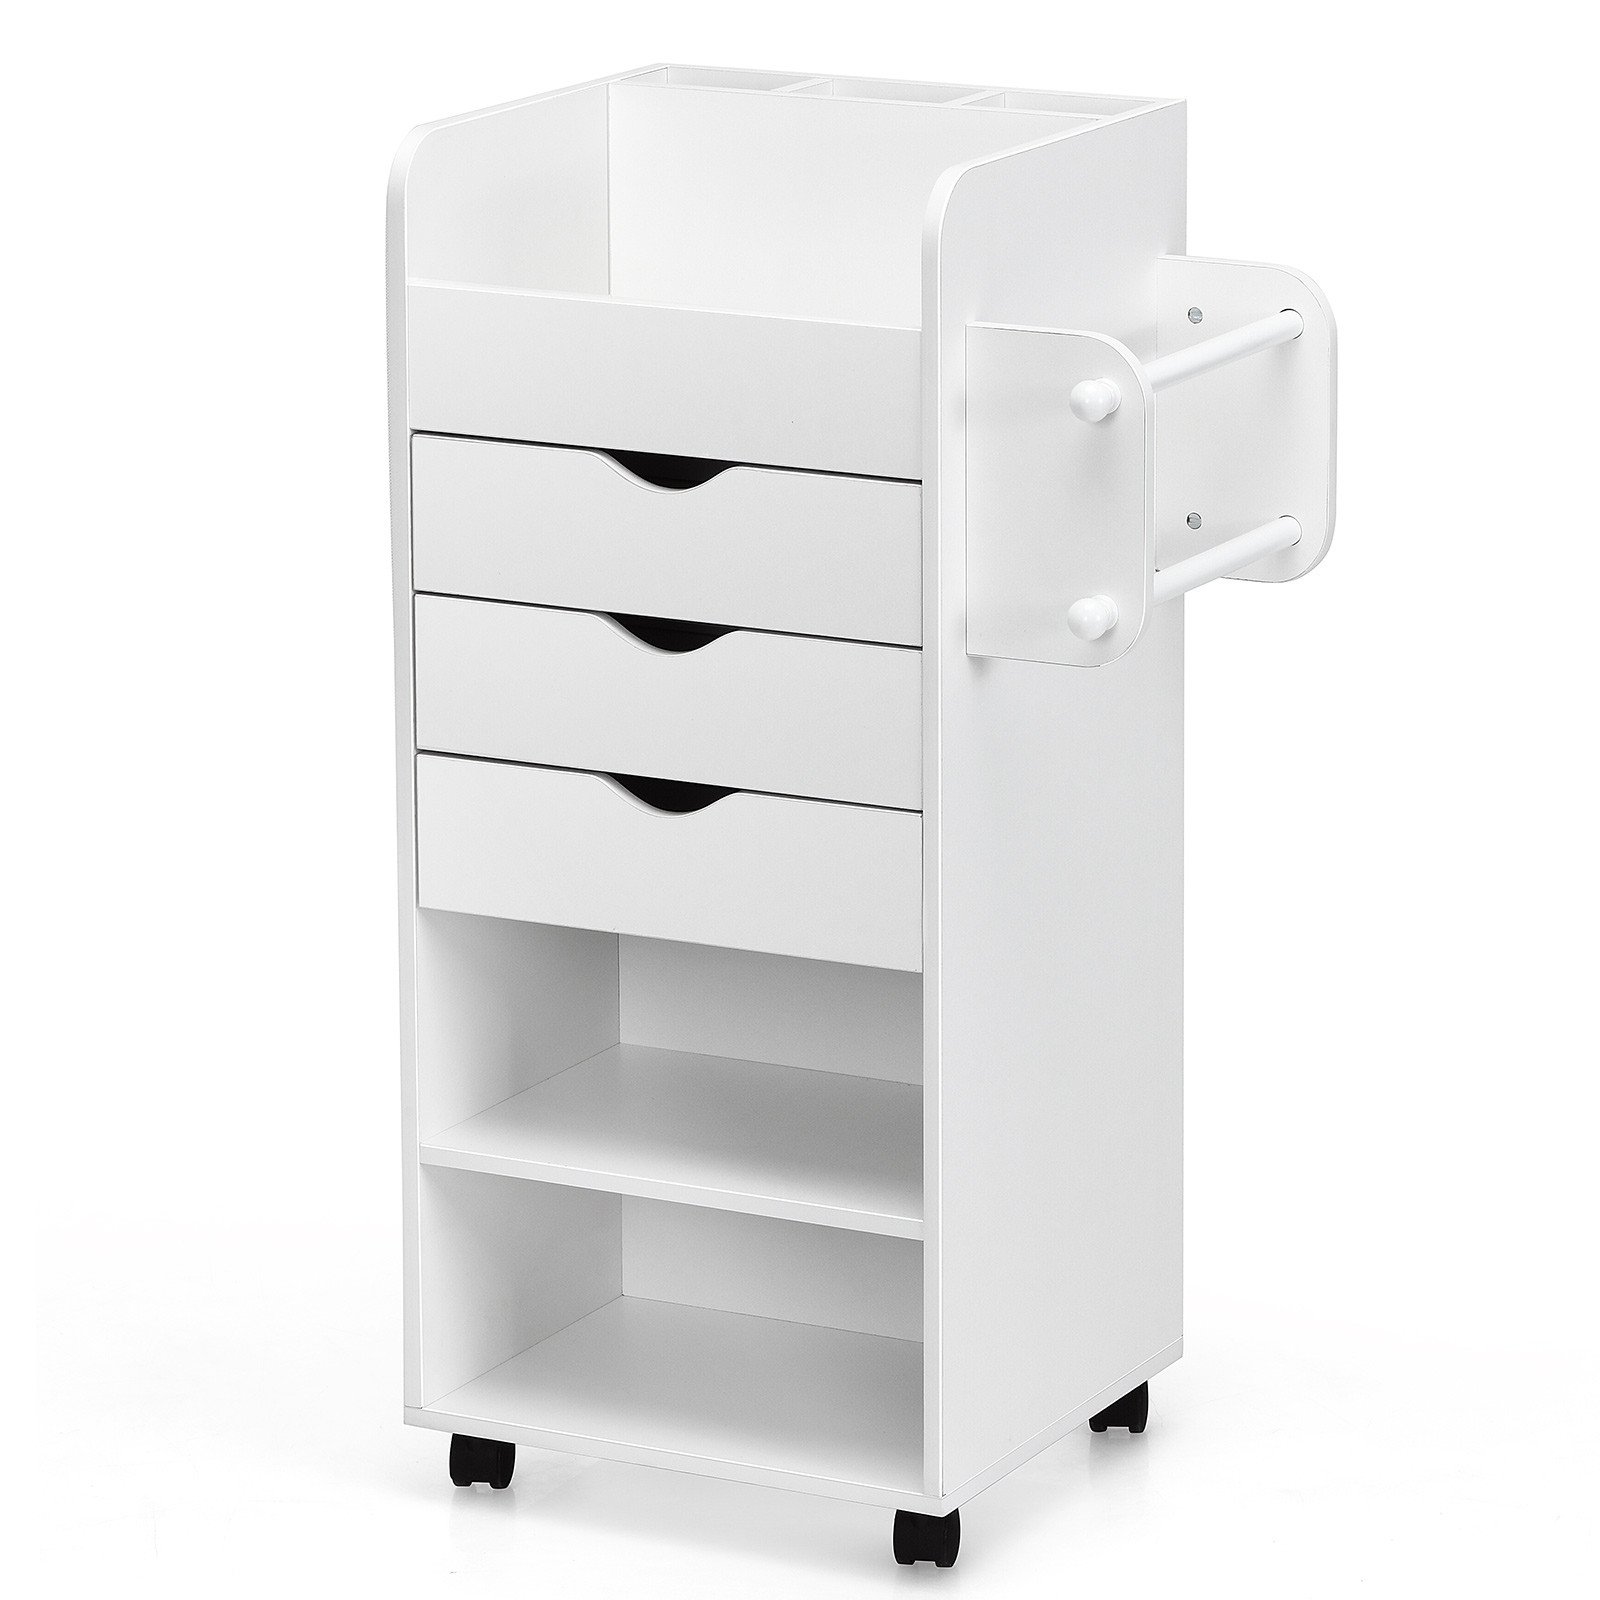 Topbuy Rolling Storage Cart with 3 Drawers&3 Shelves Storage Organizer Cabinet with Lockable Casters